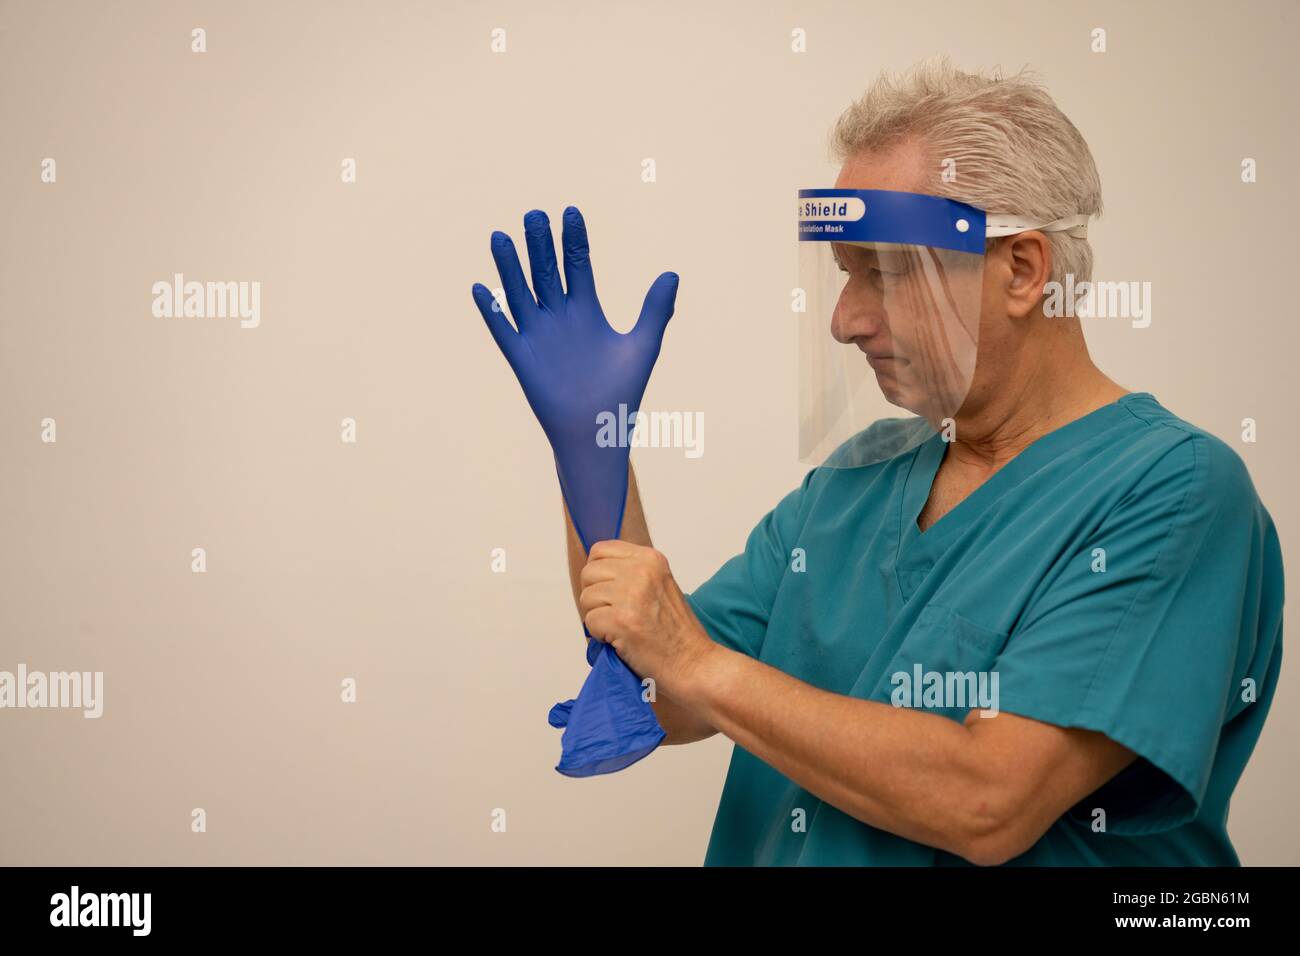 Doctor or nurse wearing a face shield mask and putting on blue latex gloves Stock Photo